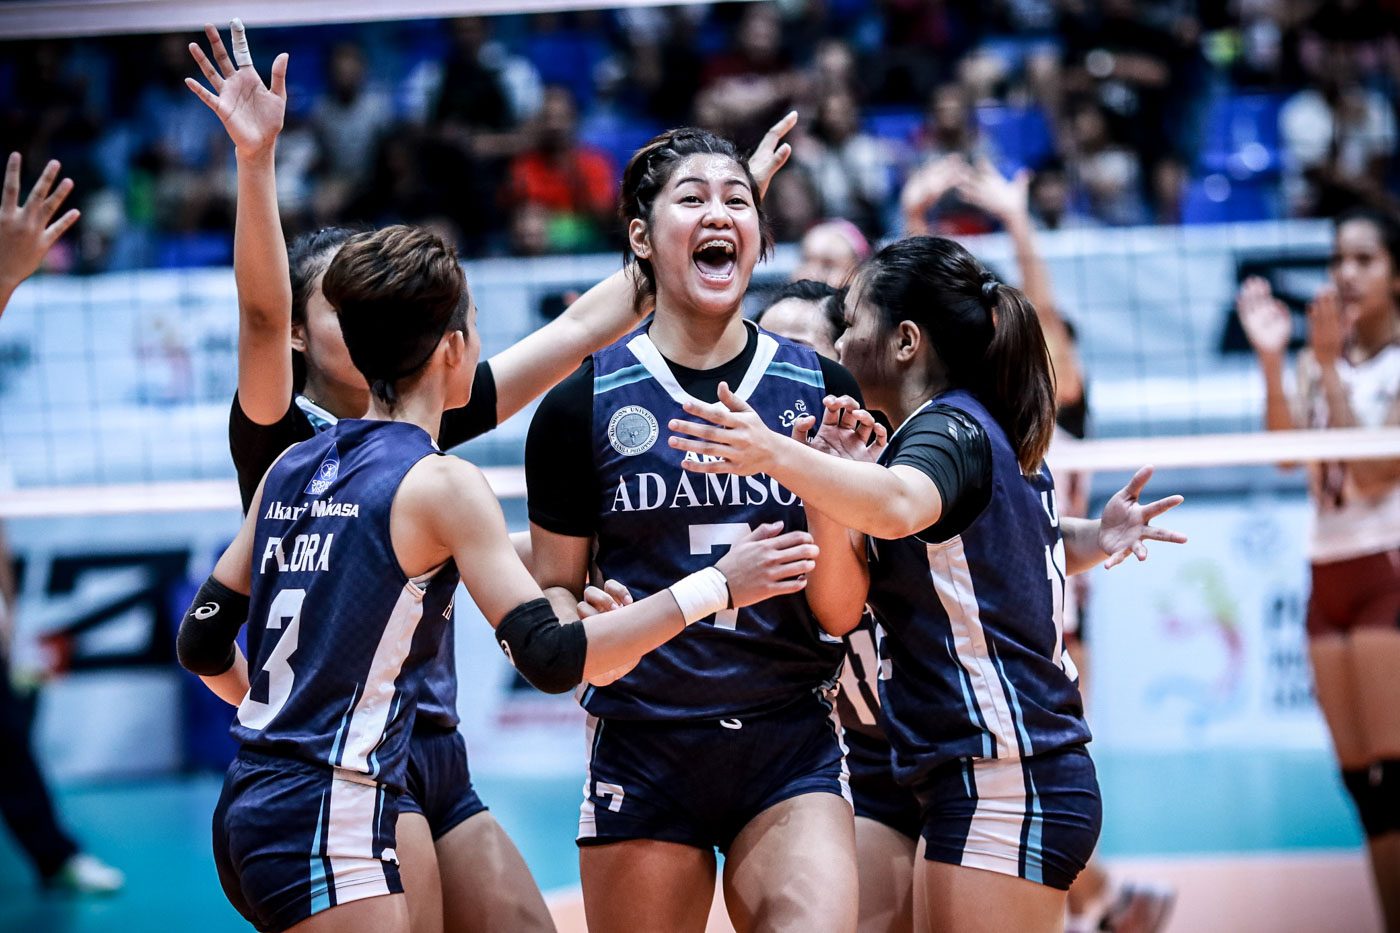 Lady Falcons, Tams force PVL sudden-death semis